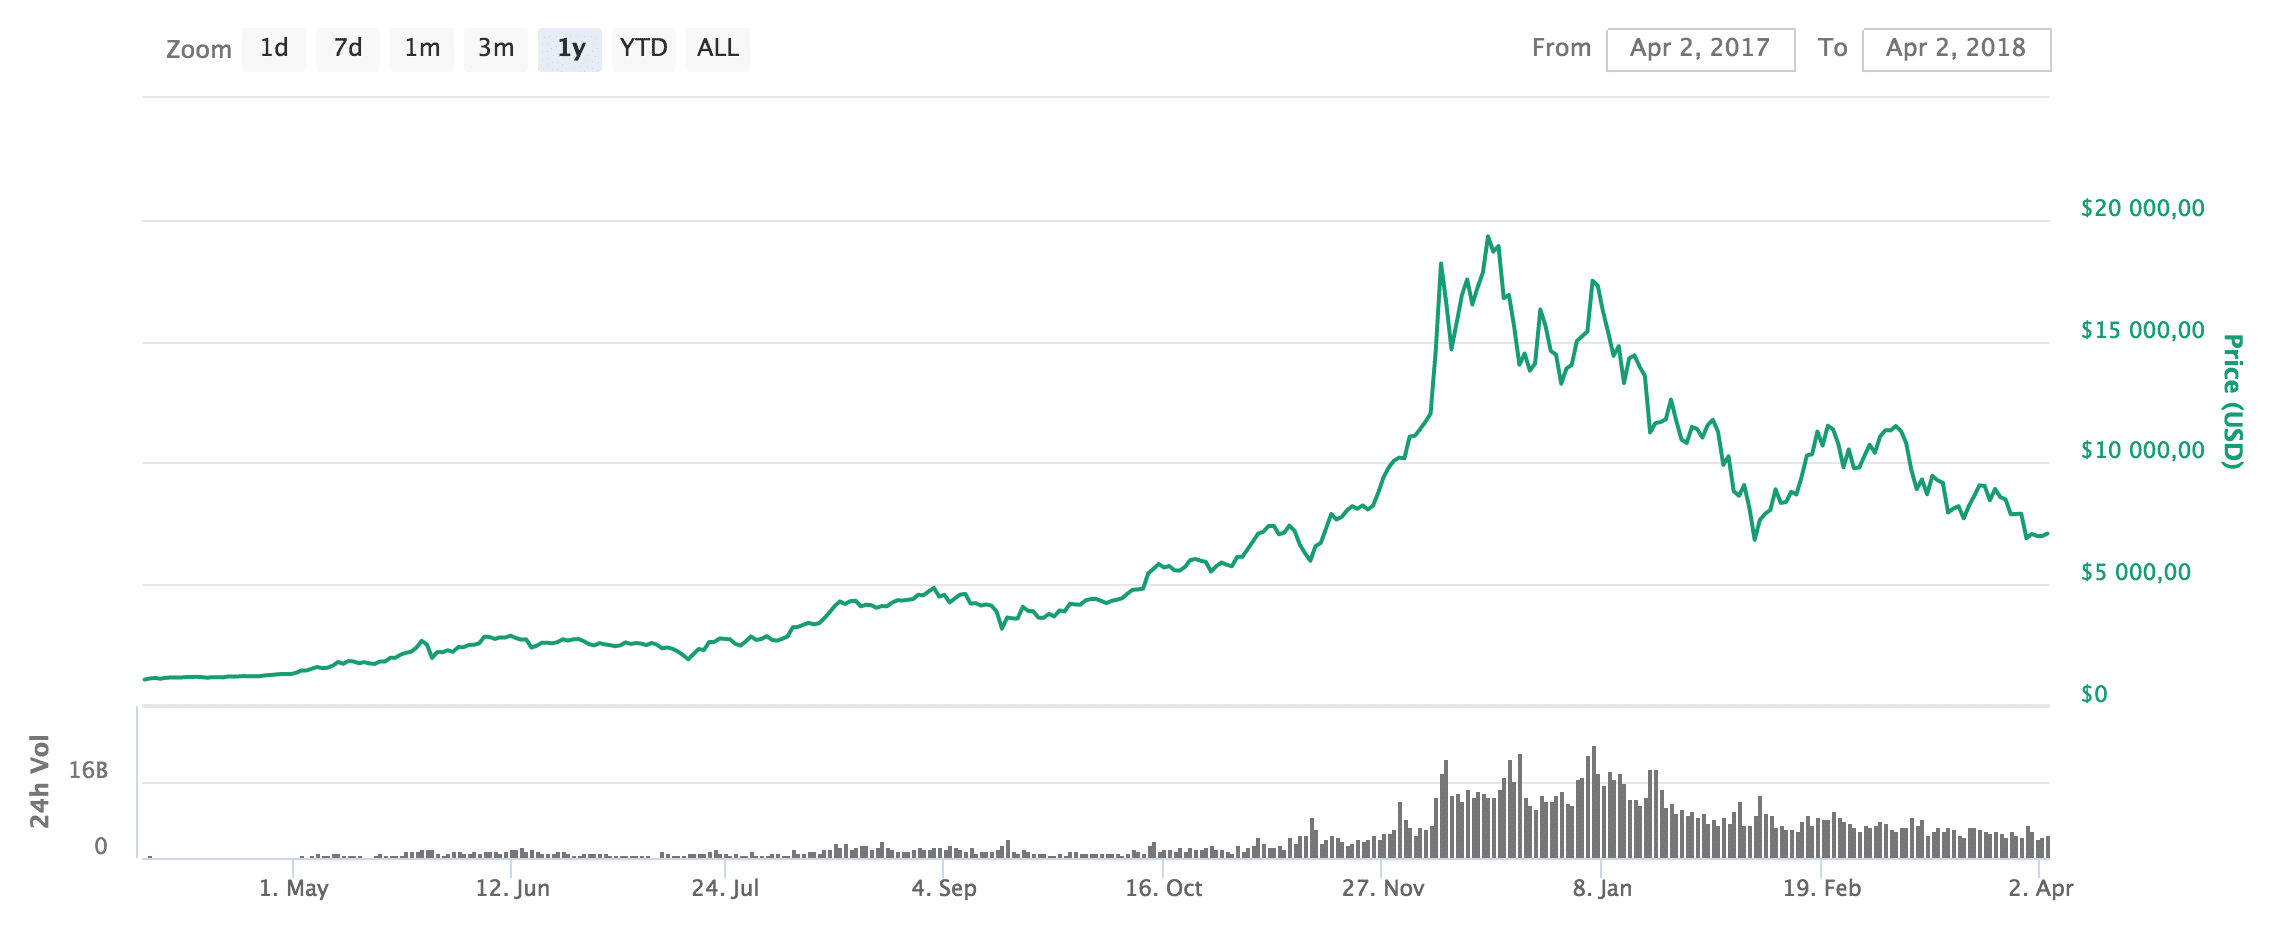 The price of Bitcoin during the past year.